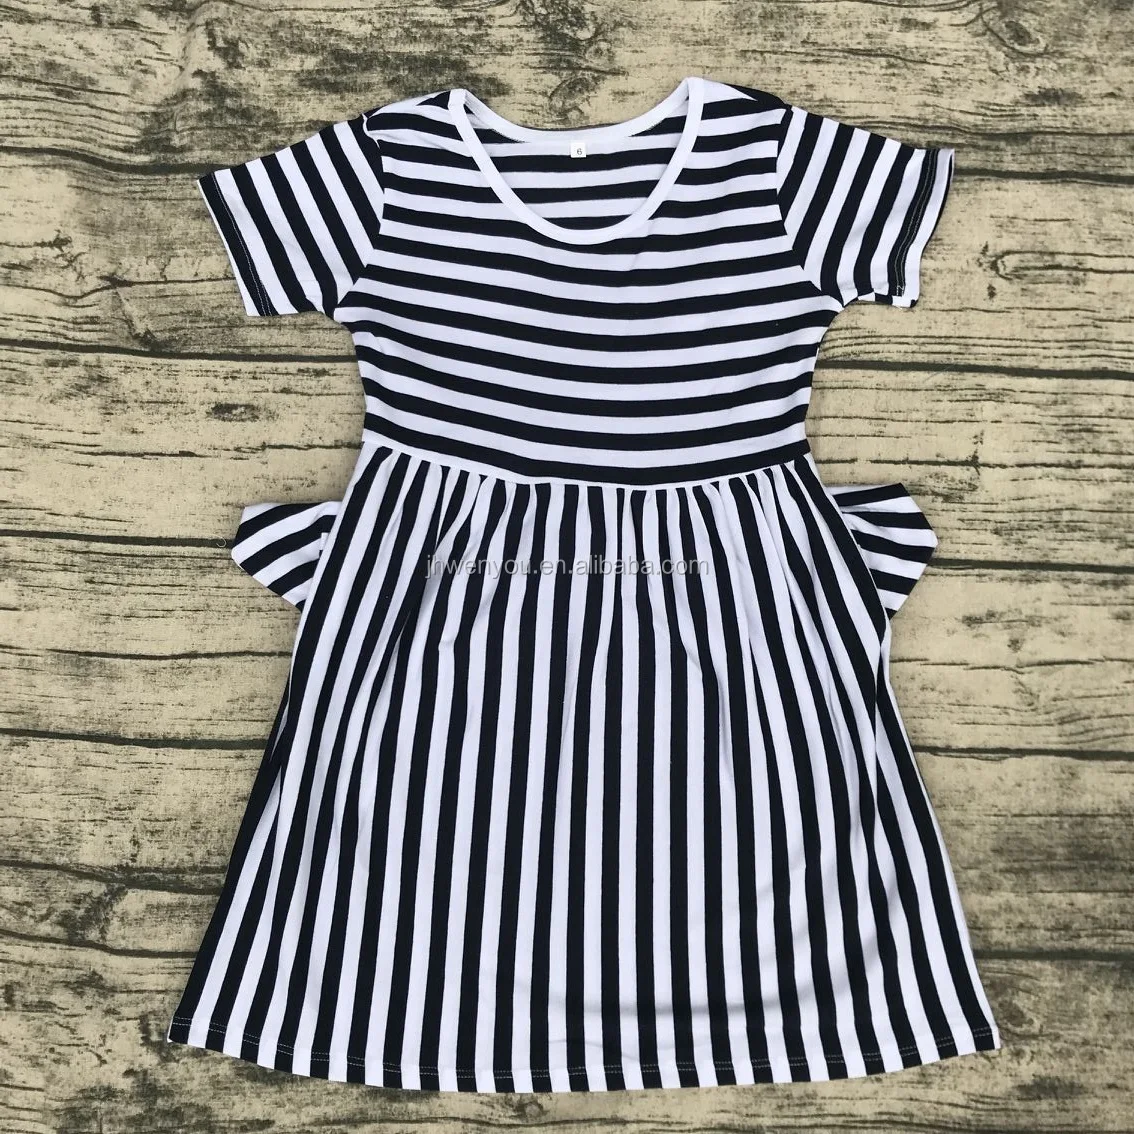 New Spring Clothing Black And White Striped Dress Little Baby Girl Kid ...